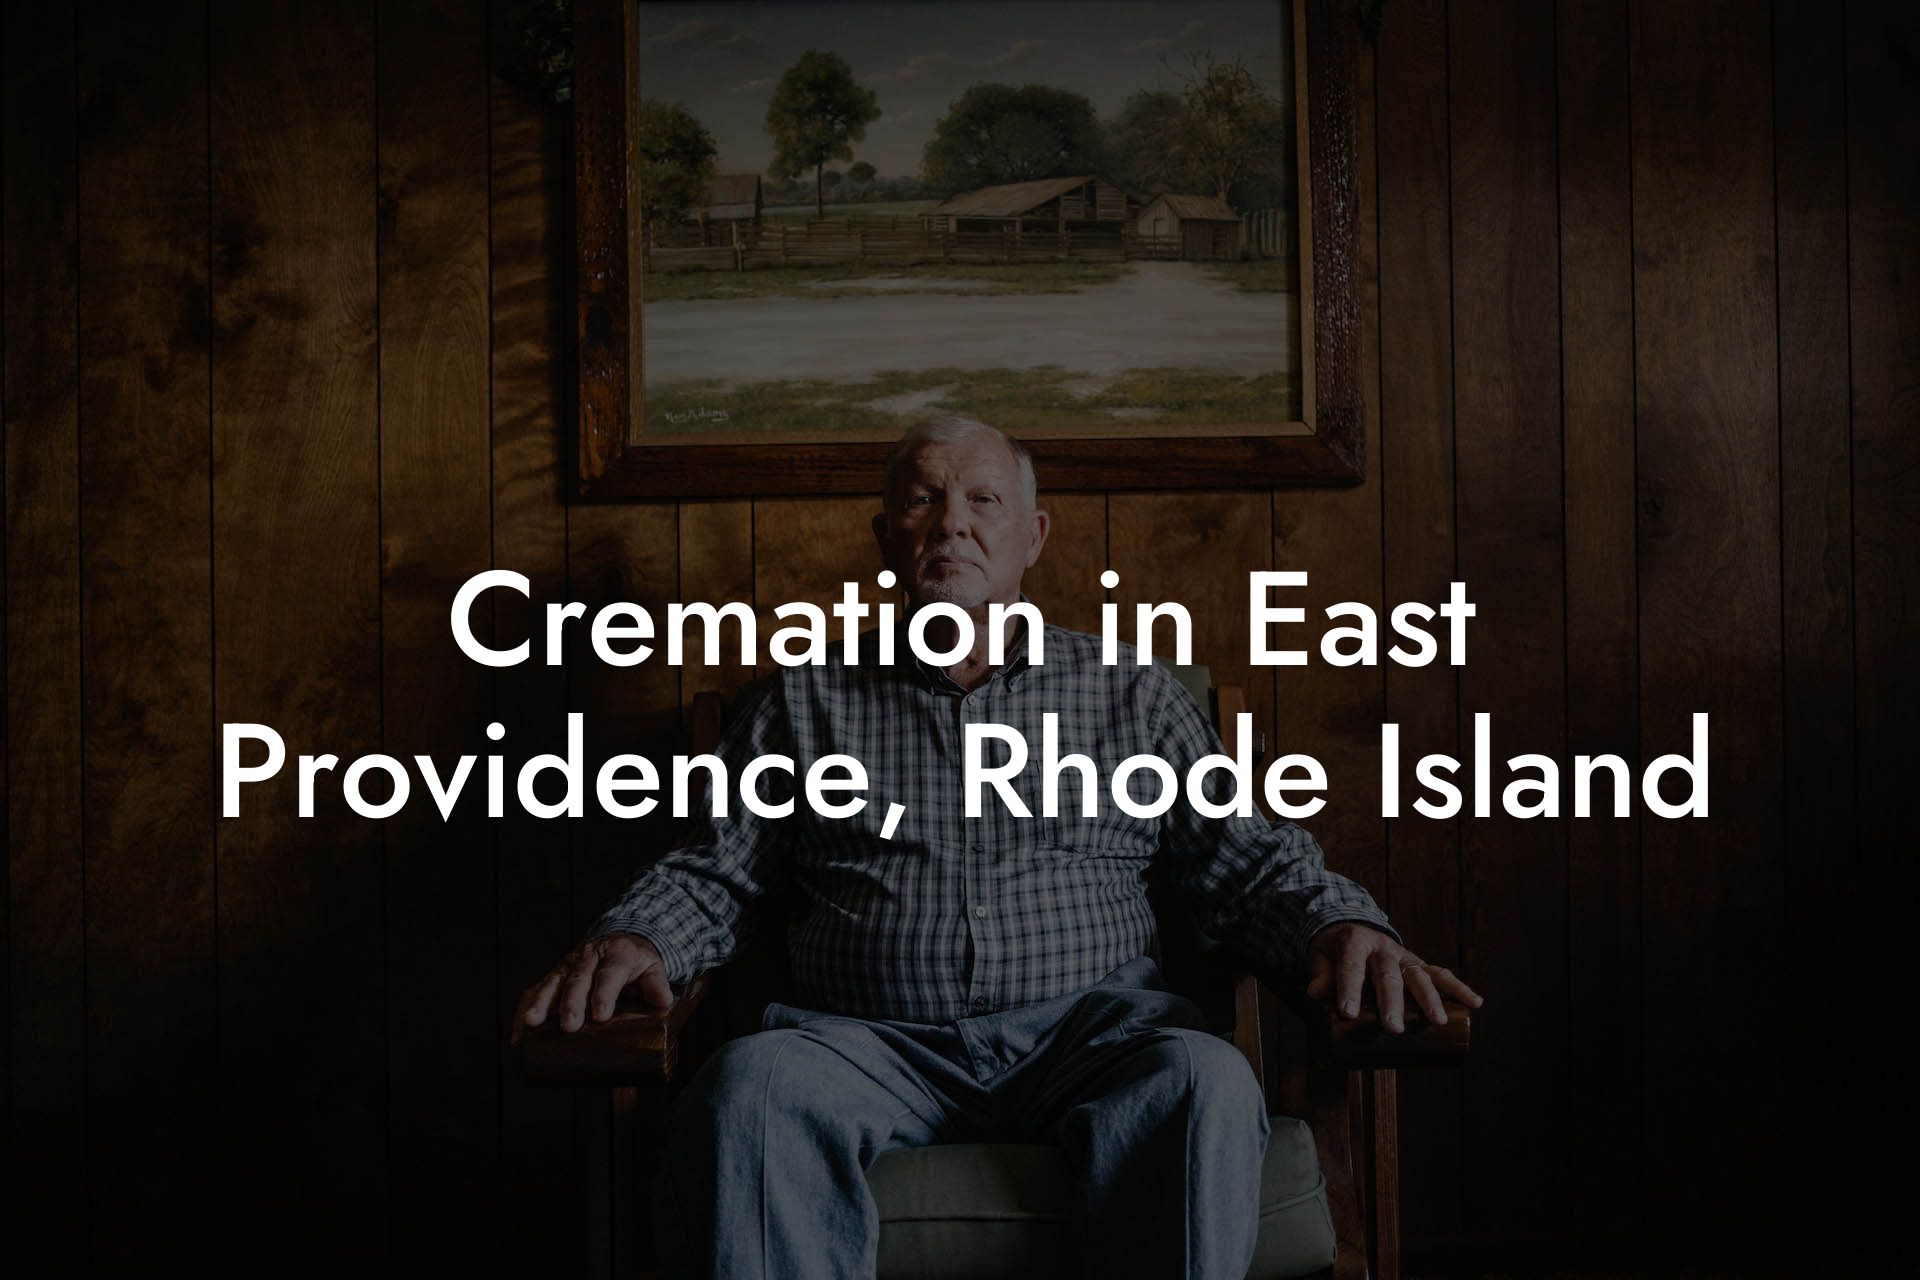 Cremation in East Providence, Rhode Island